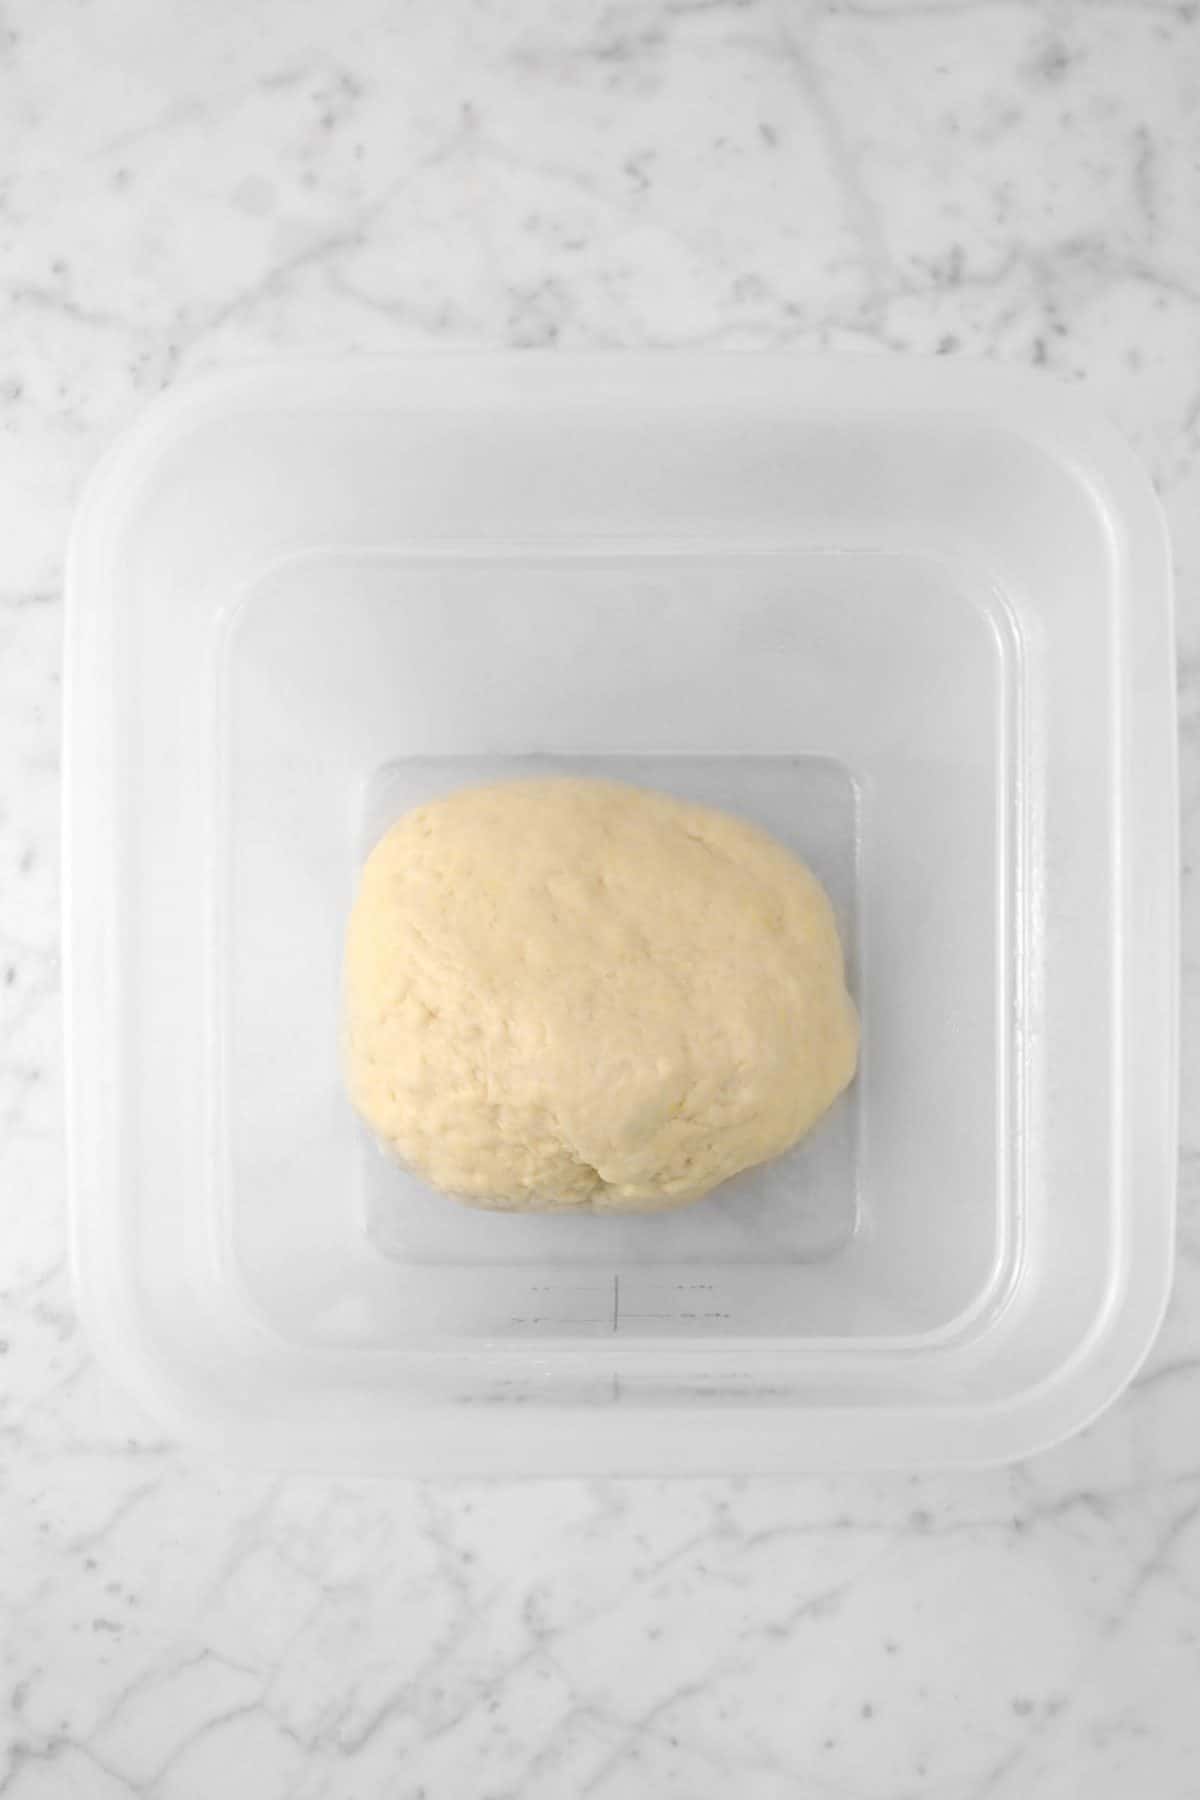 dough transferred  to a container